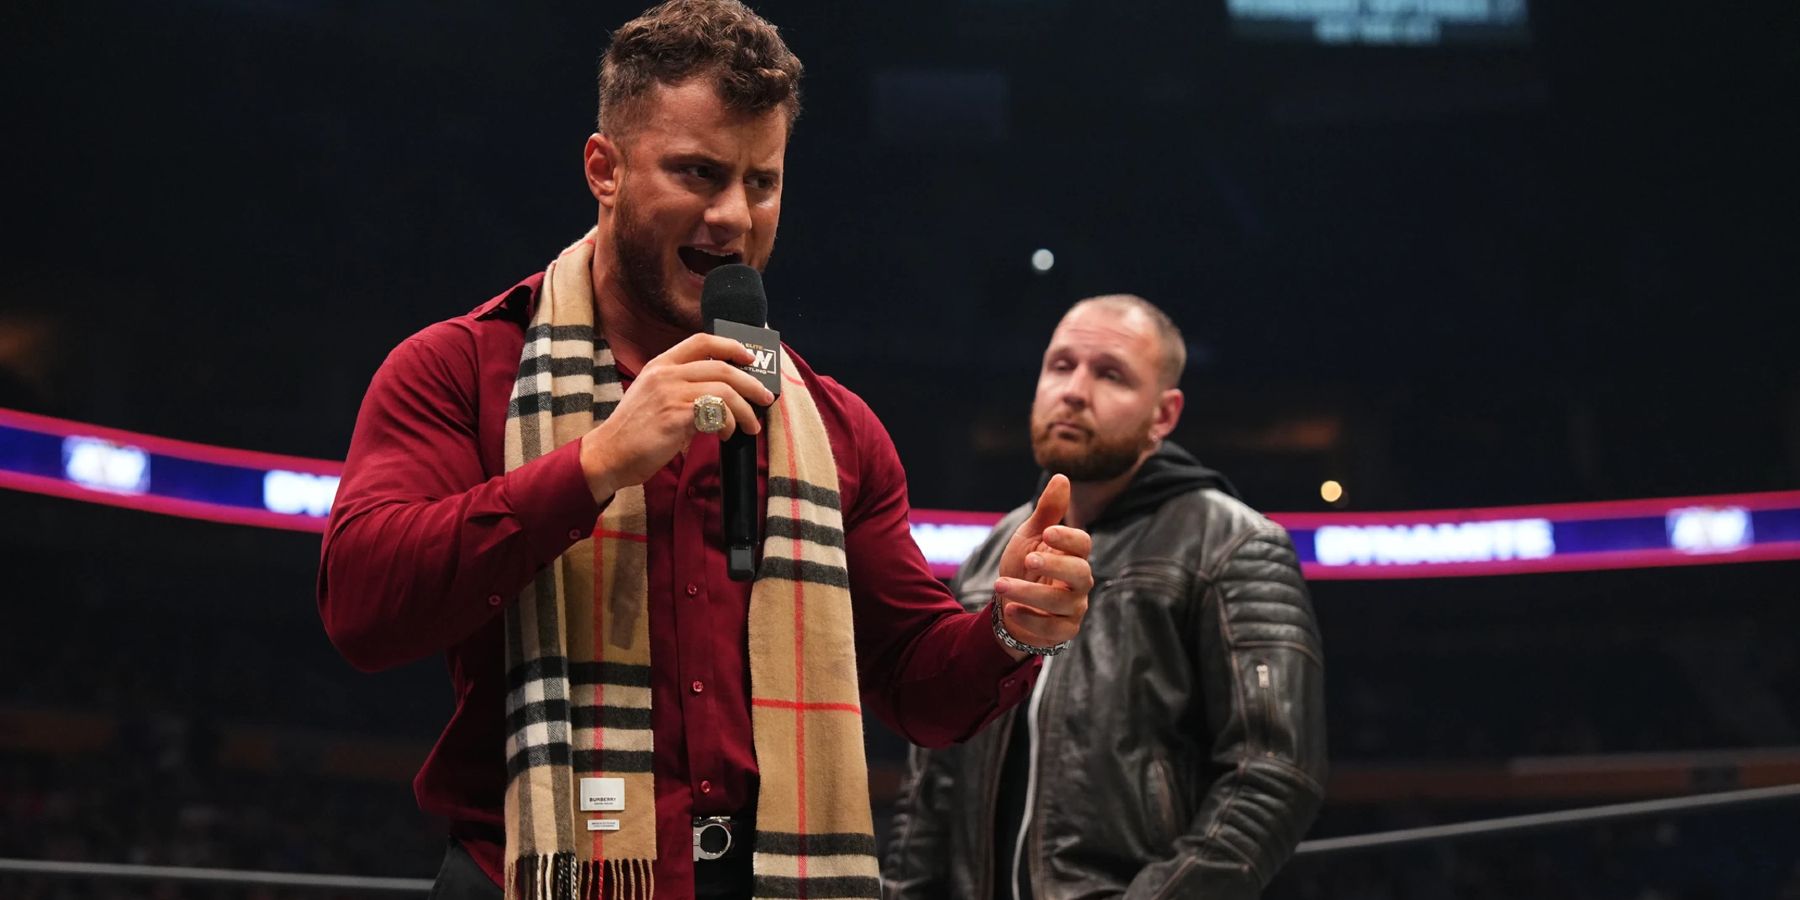 MJF cuts a promo on Jon Moxley as they build towards their match at AEW Full Gear.